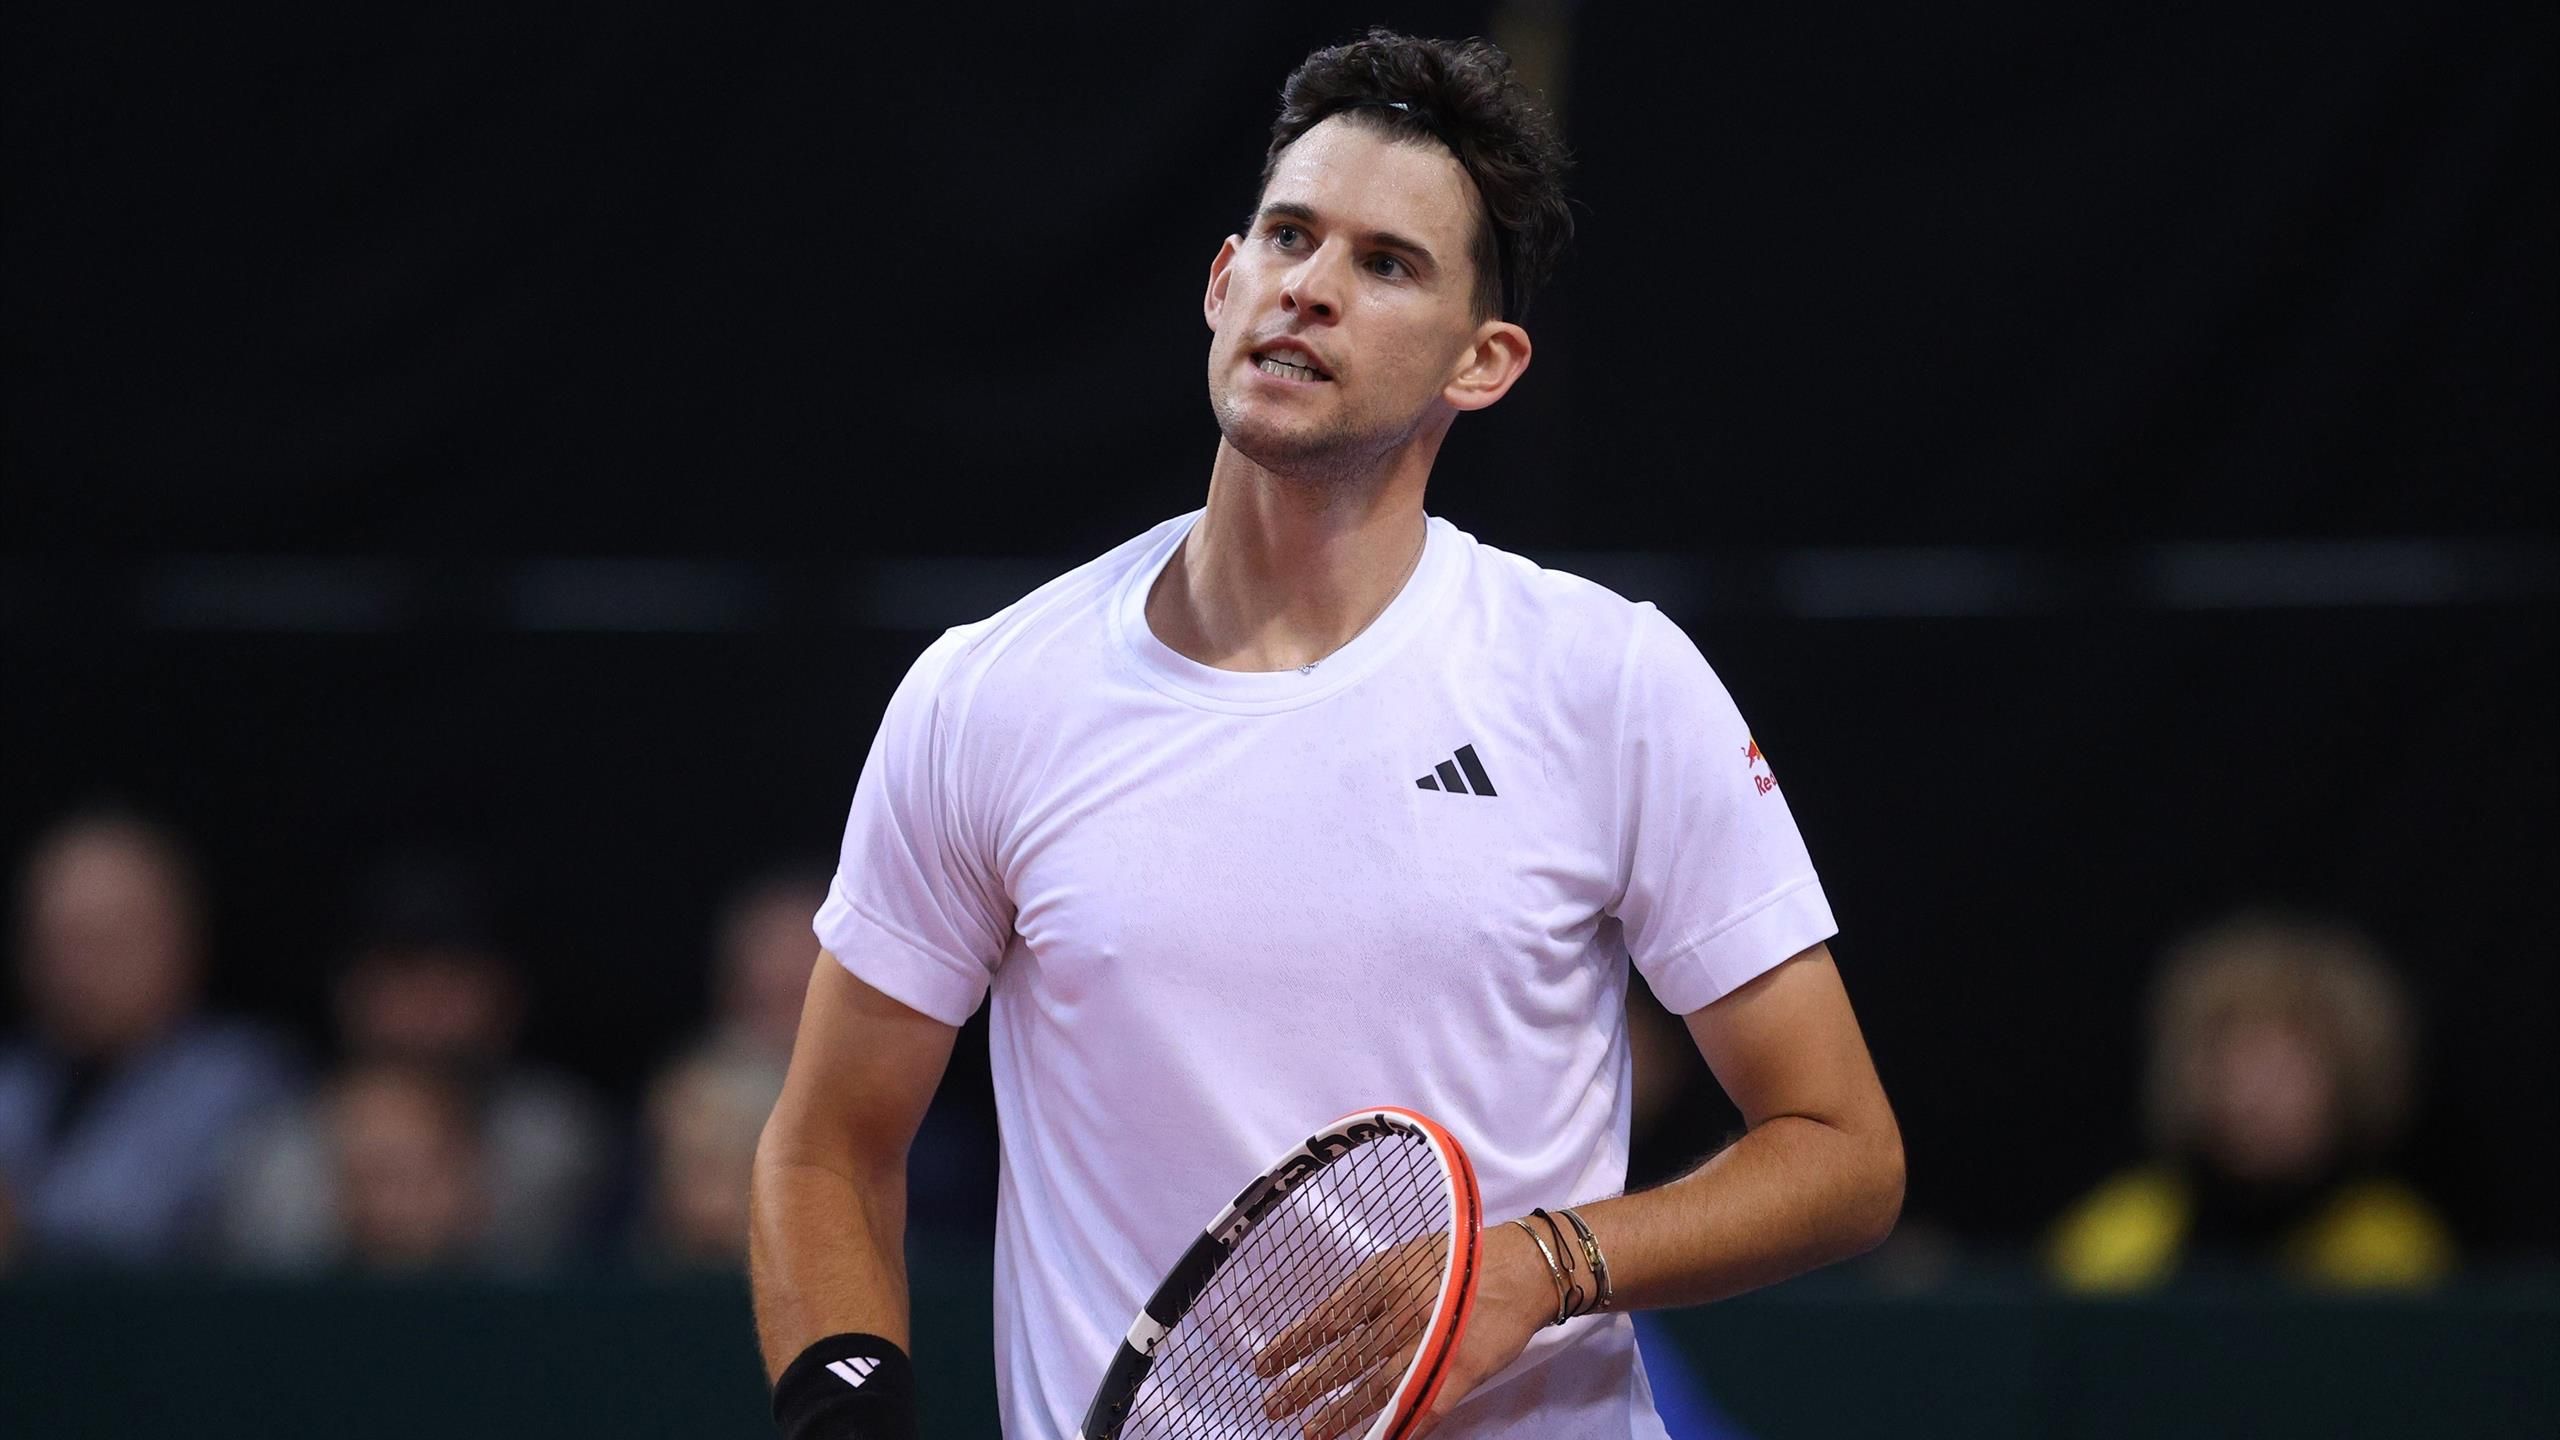 Thiem faces possibility of 9-year ATP rankings low before Roland